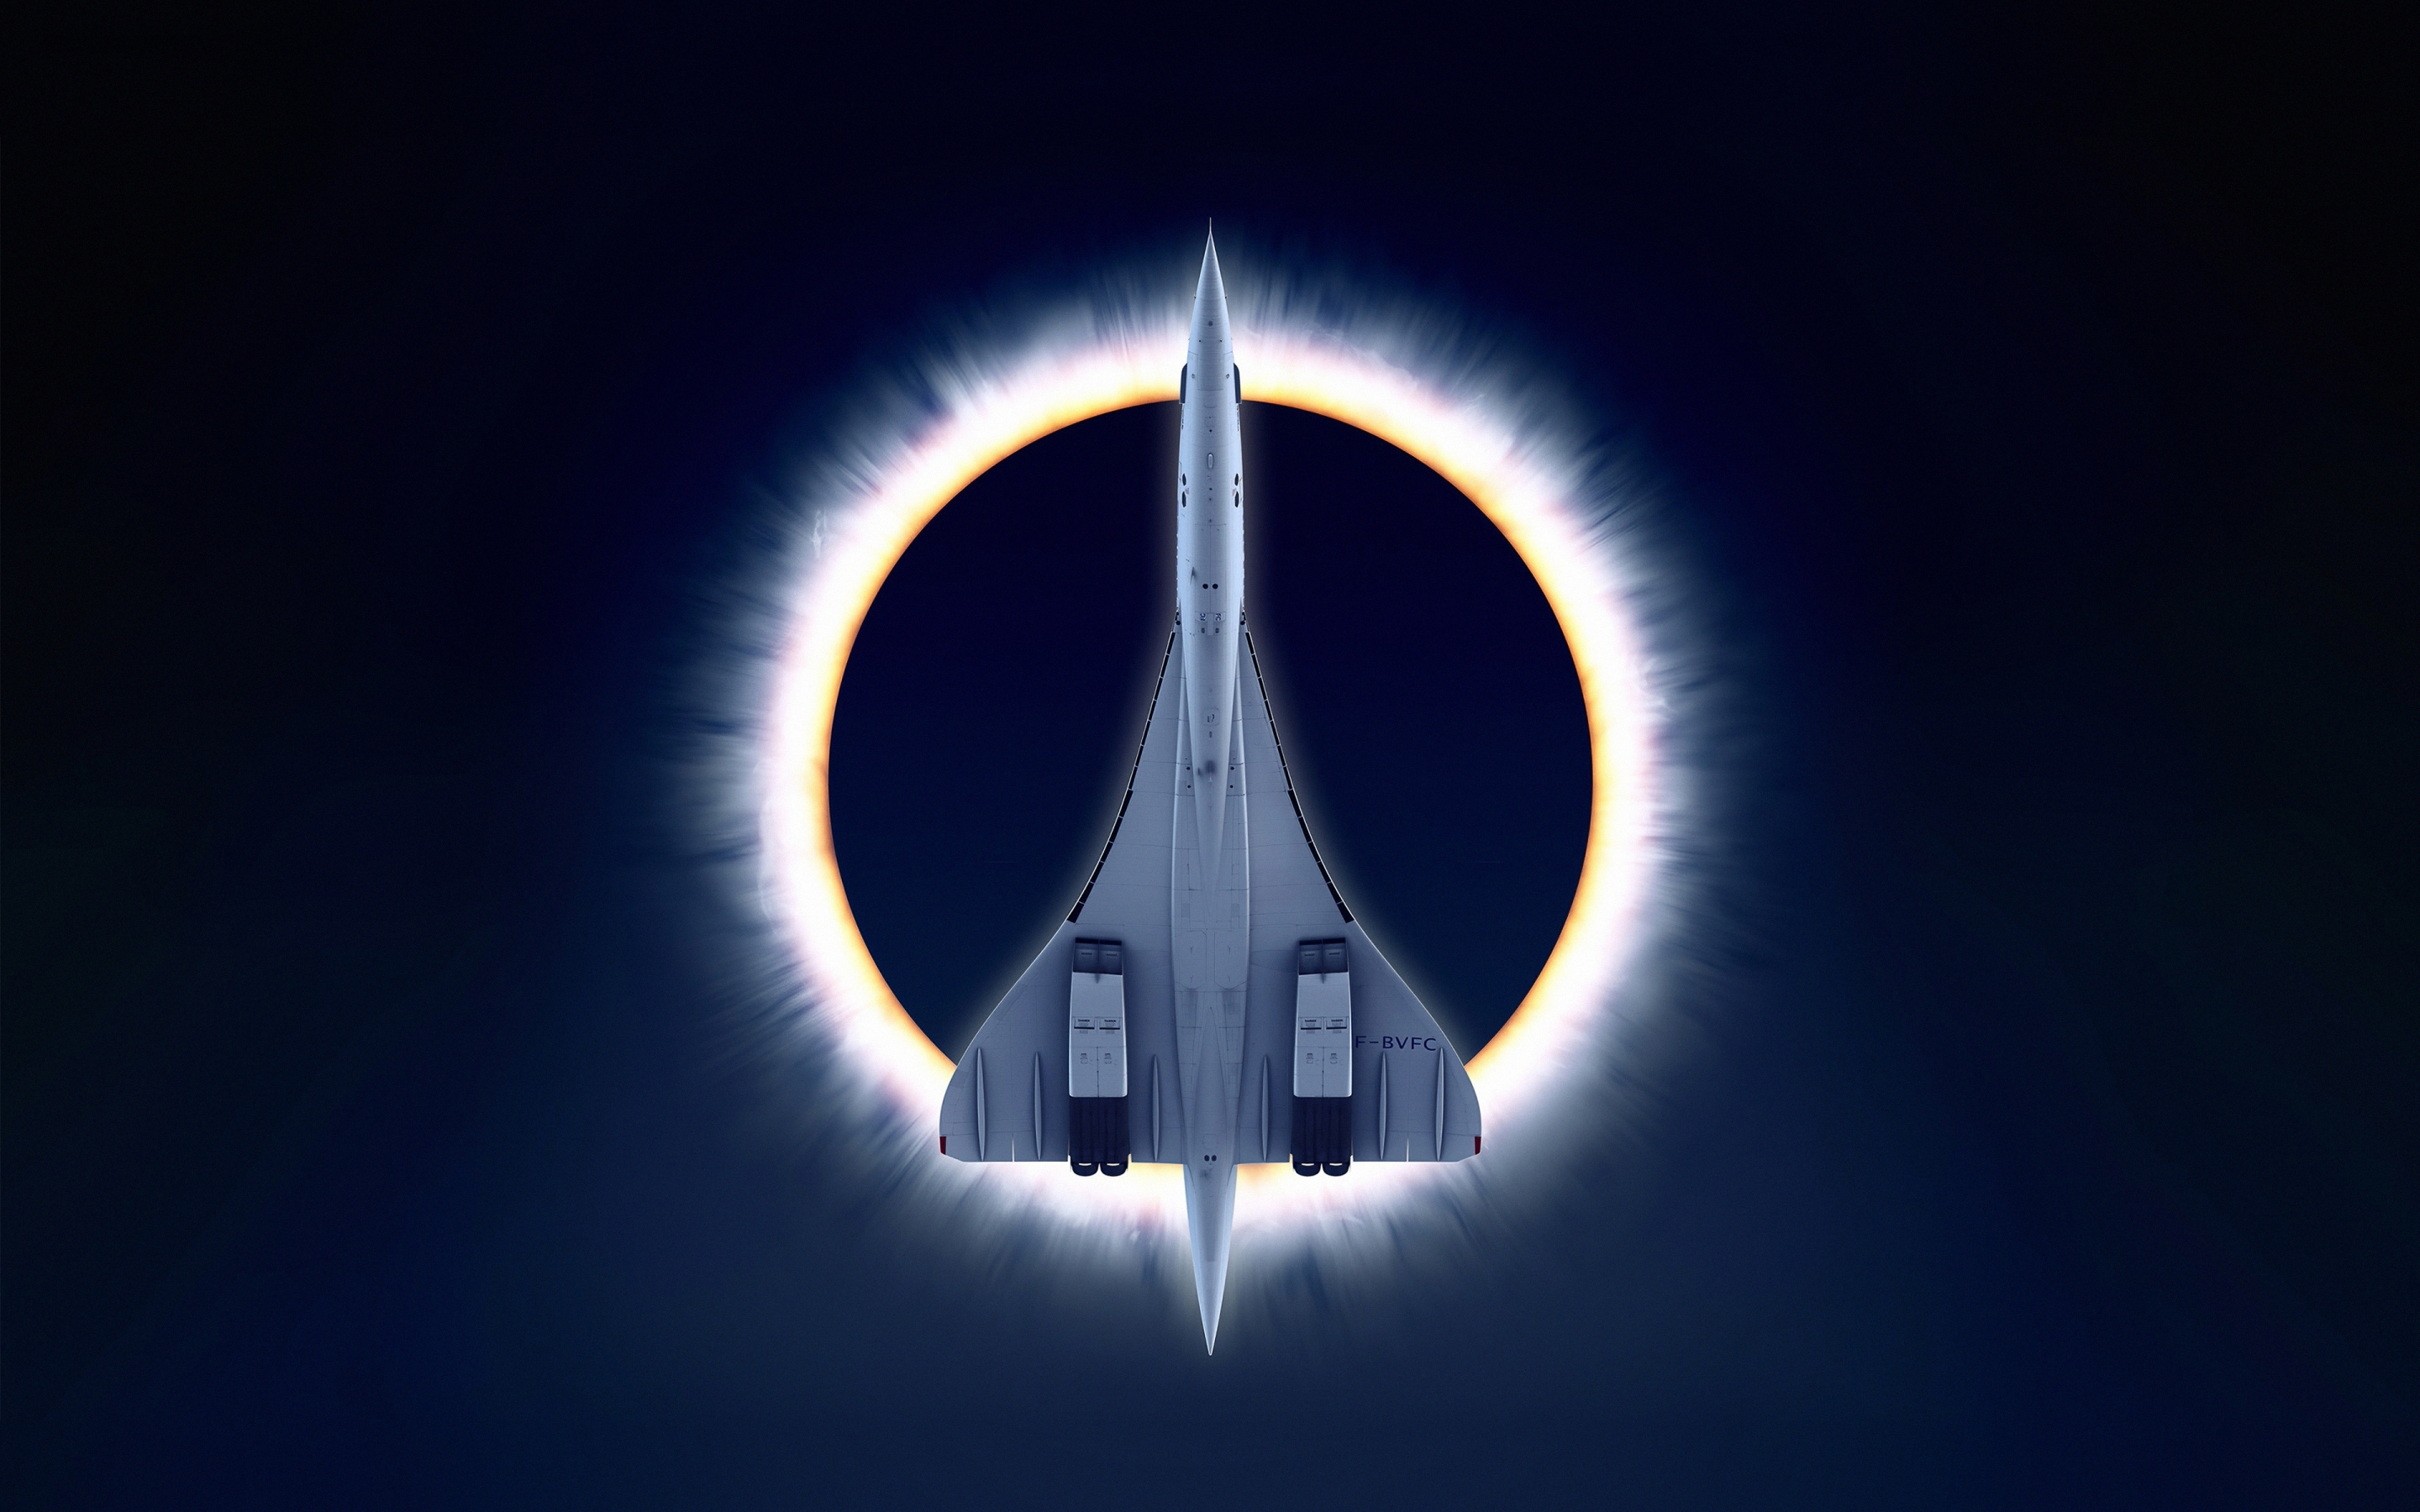 Concorde Carre, eclipse, airplane, moon, aircraft, 2880x1800 wallpaper